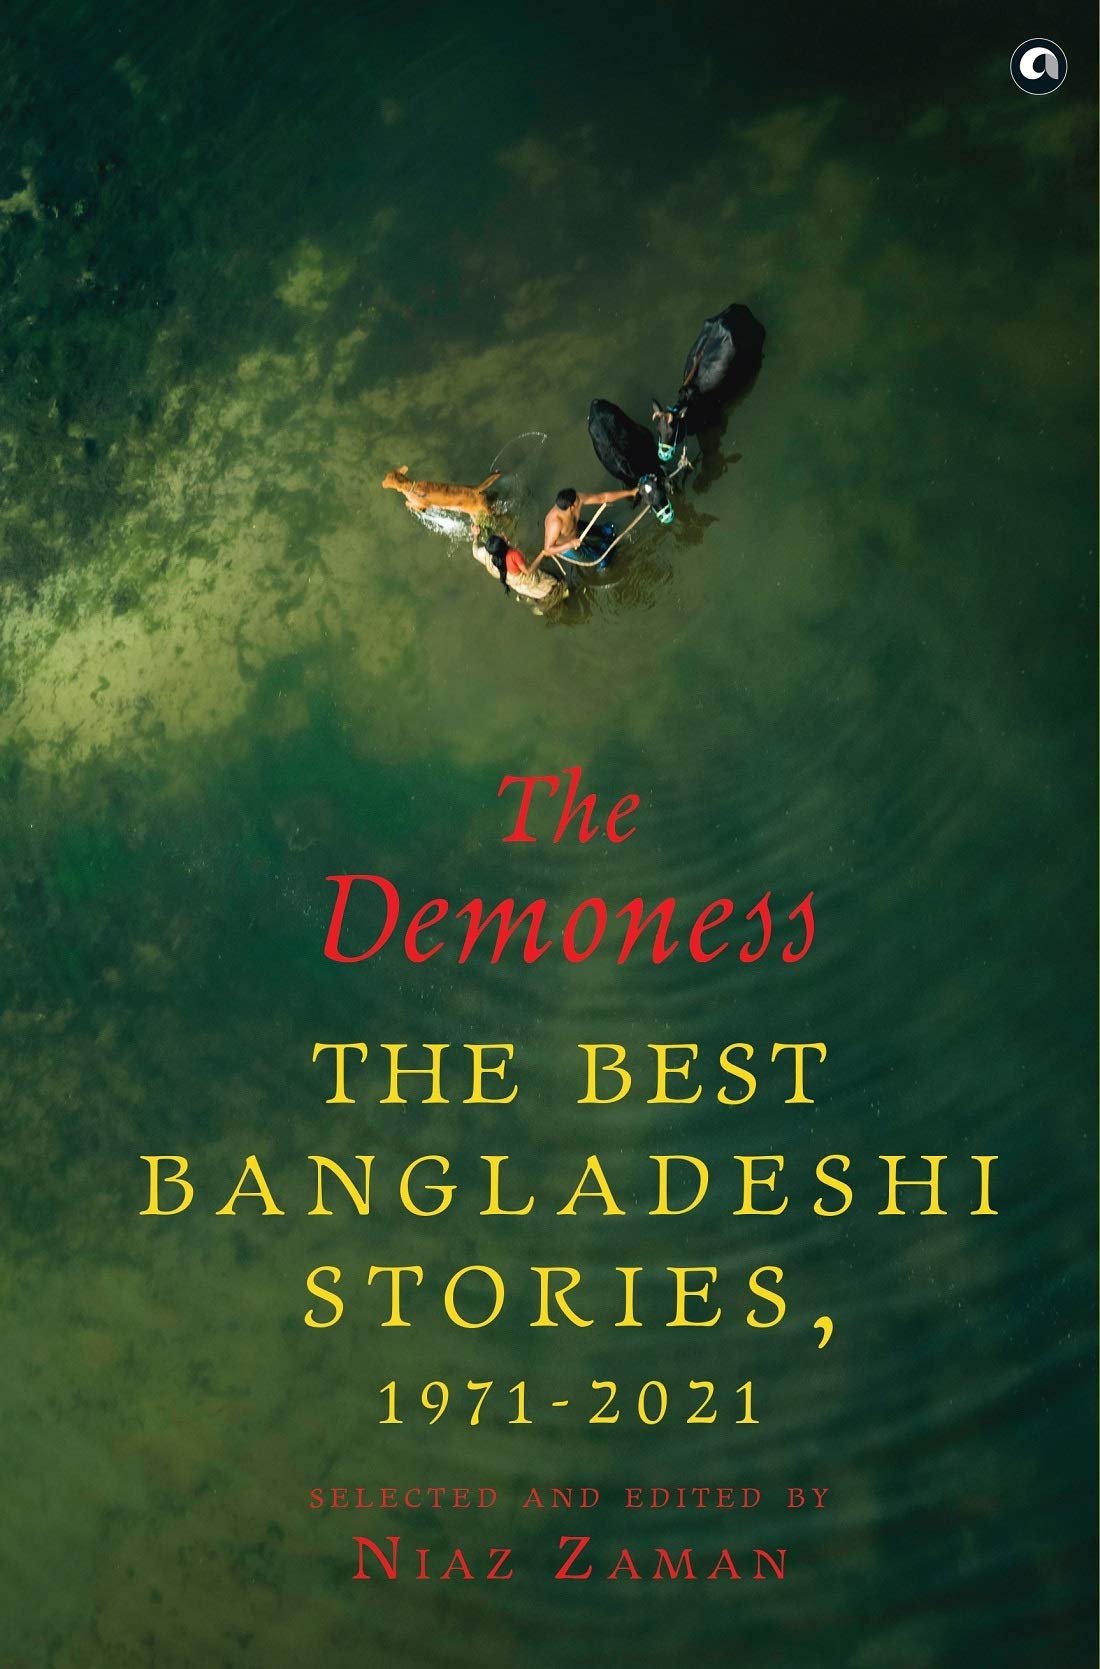 THE DEMONESS THE BEST BANGLADESHI STORIES 1971-2021